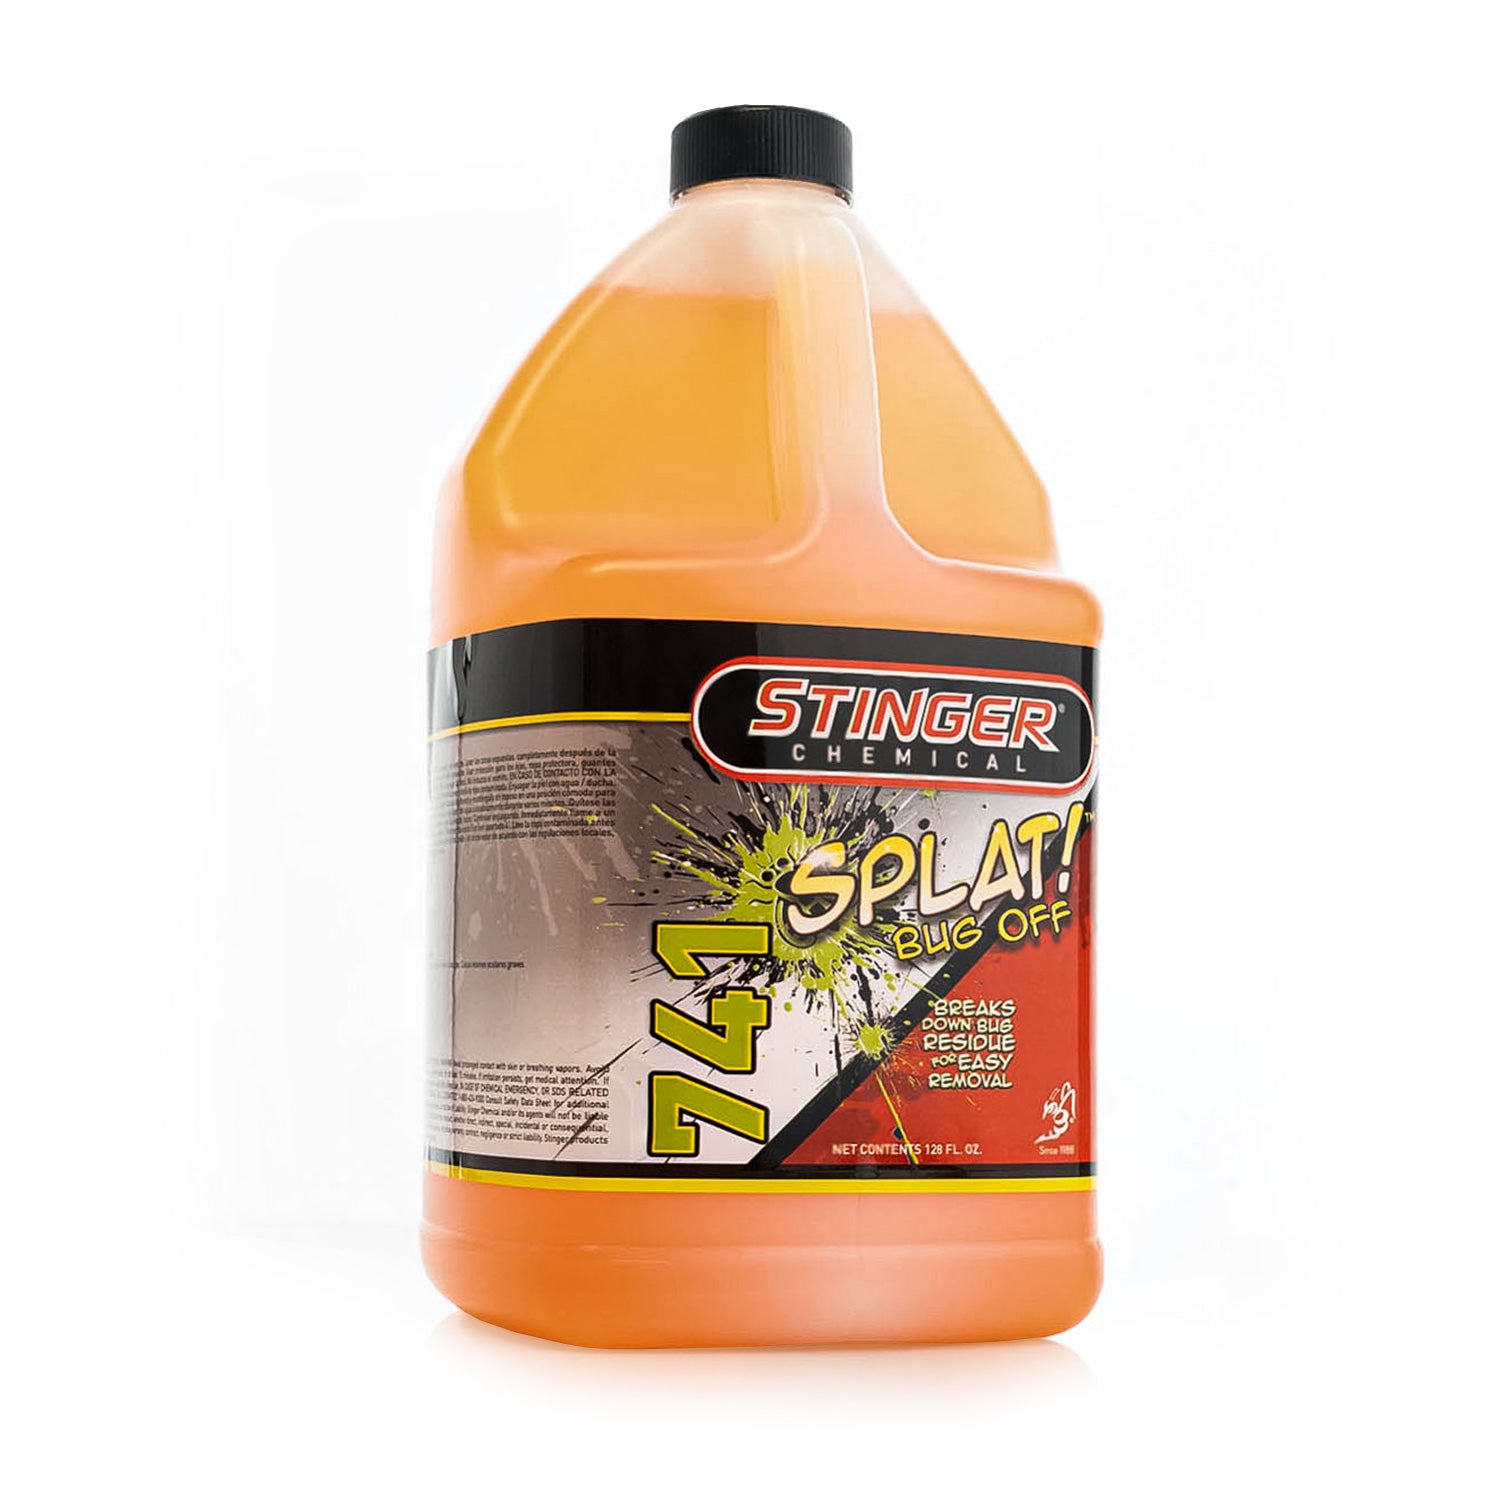 stinger-chemicals-brown-splat-bug-remover-in-a-single-plastic-gallon-container-with-lid